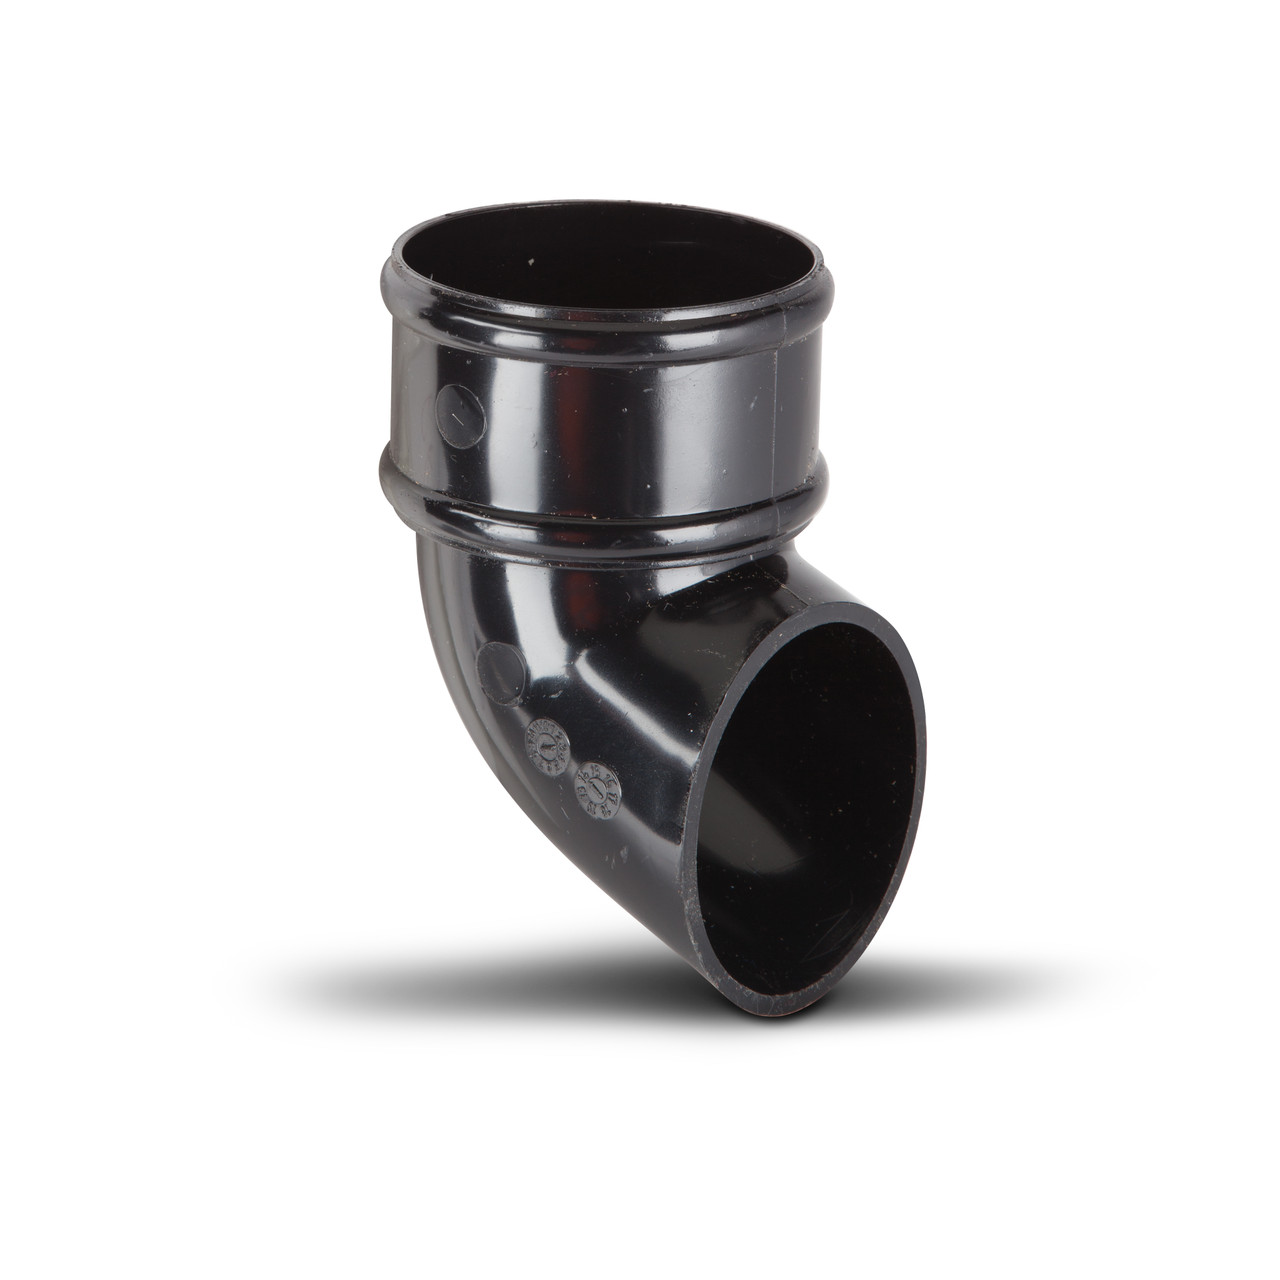 Photograph of Polypipe Round Pipe 68mm Black Pipe Shoe